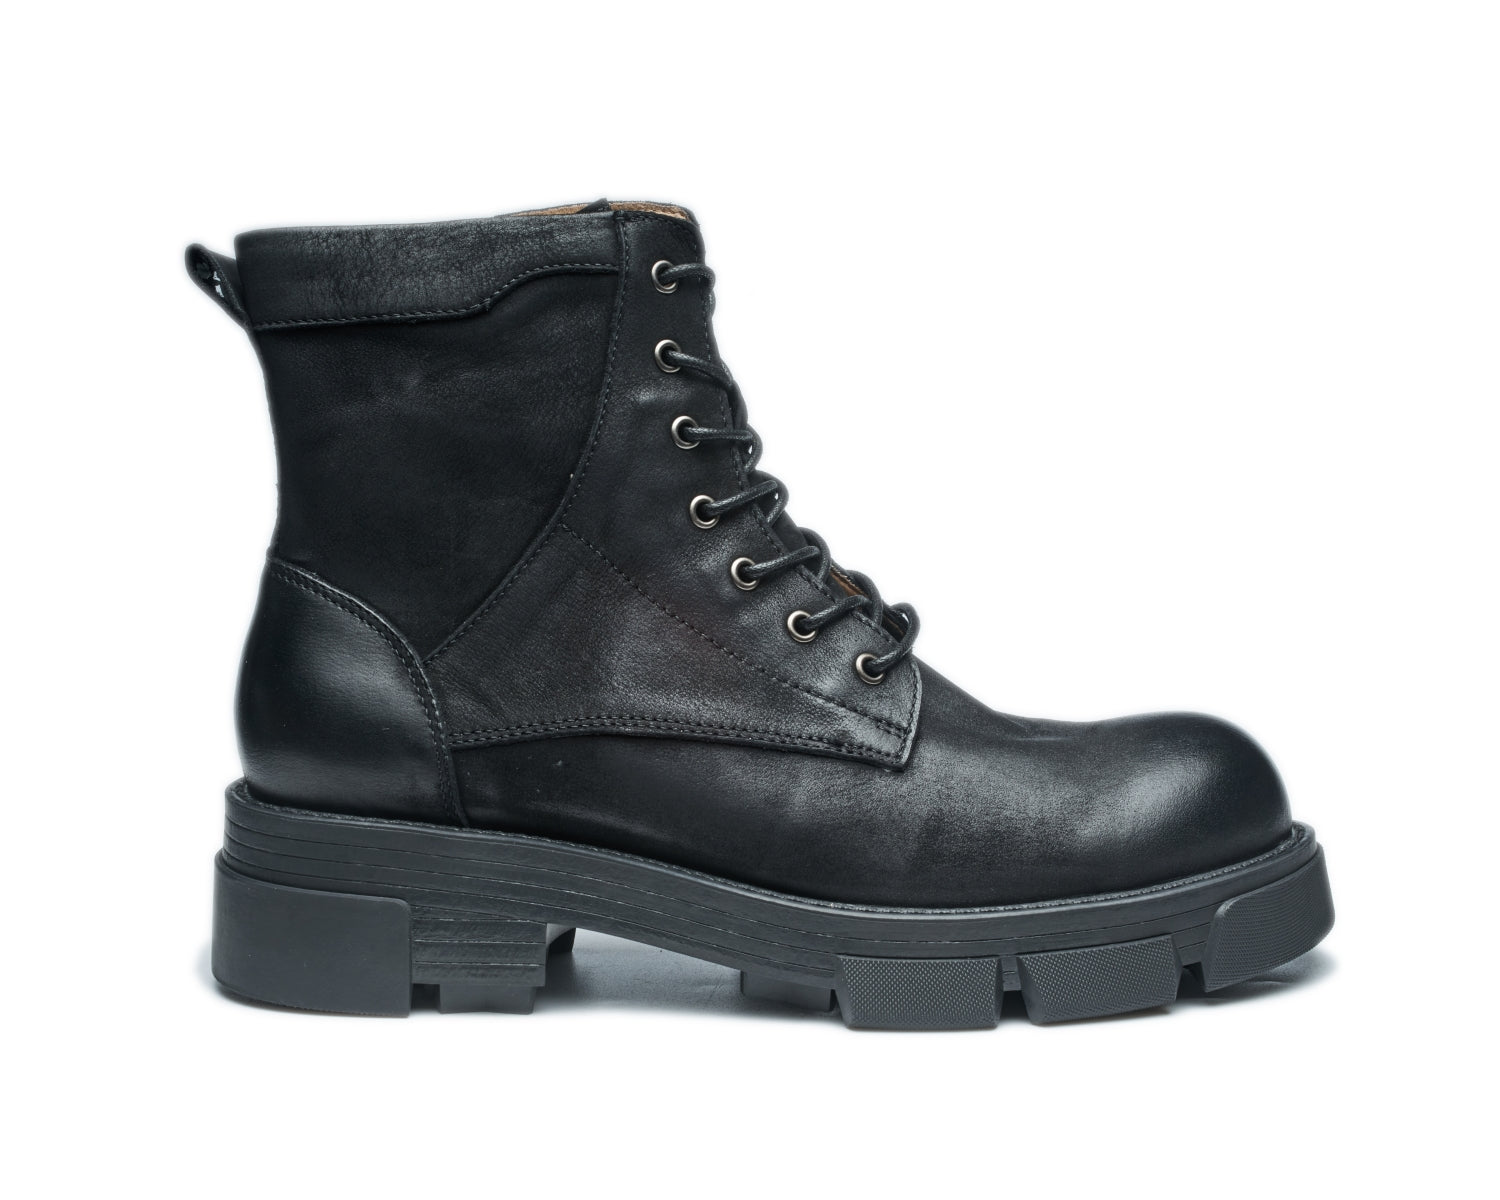 Men's lace-up zipper work boots with lug sole in various styles including manner, old, and skin boots11